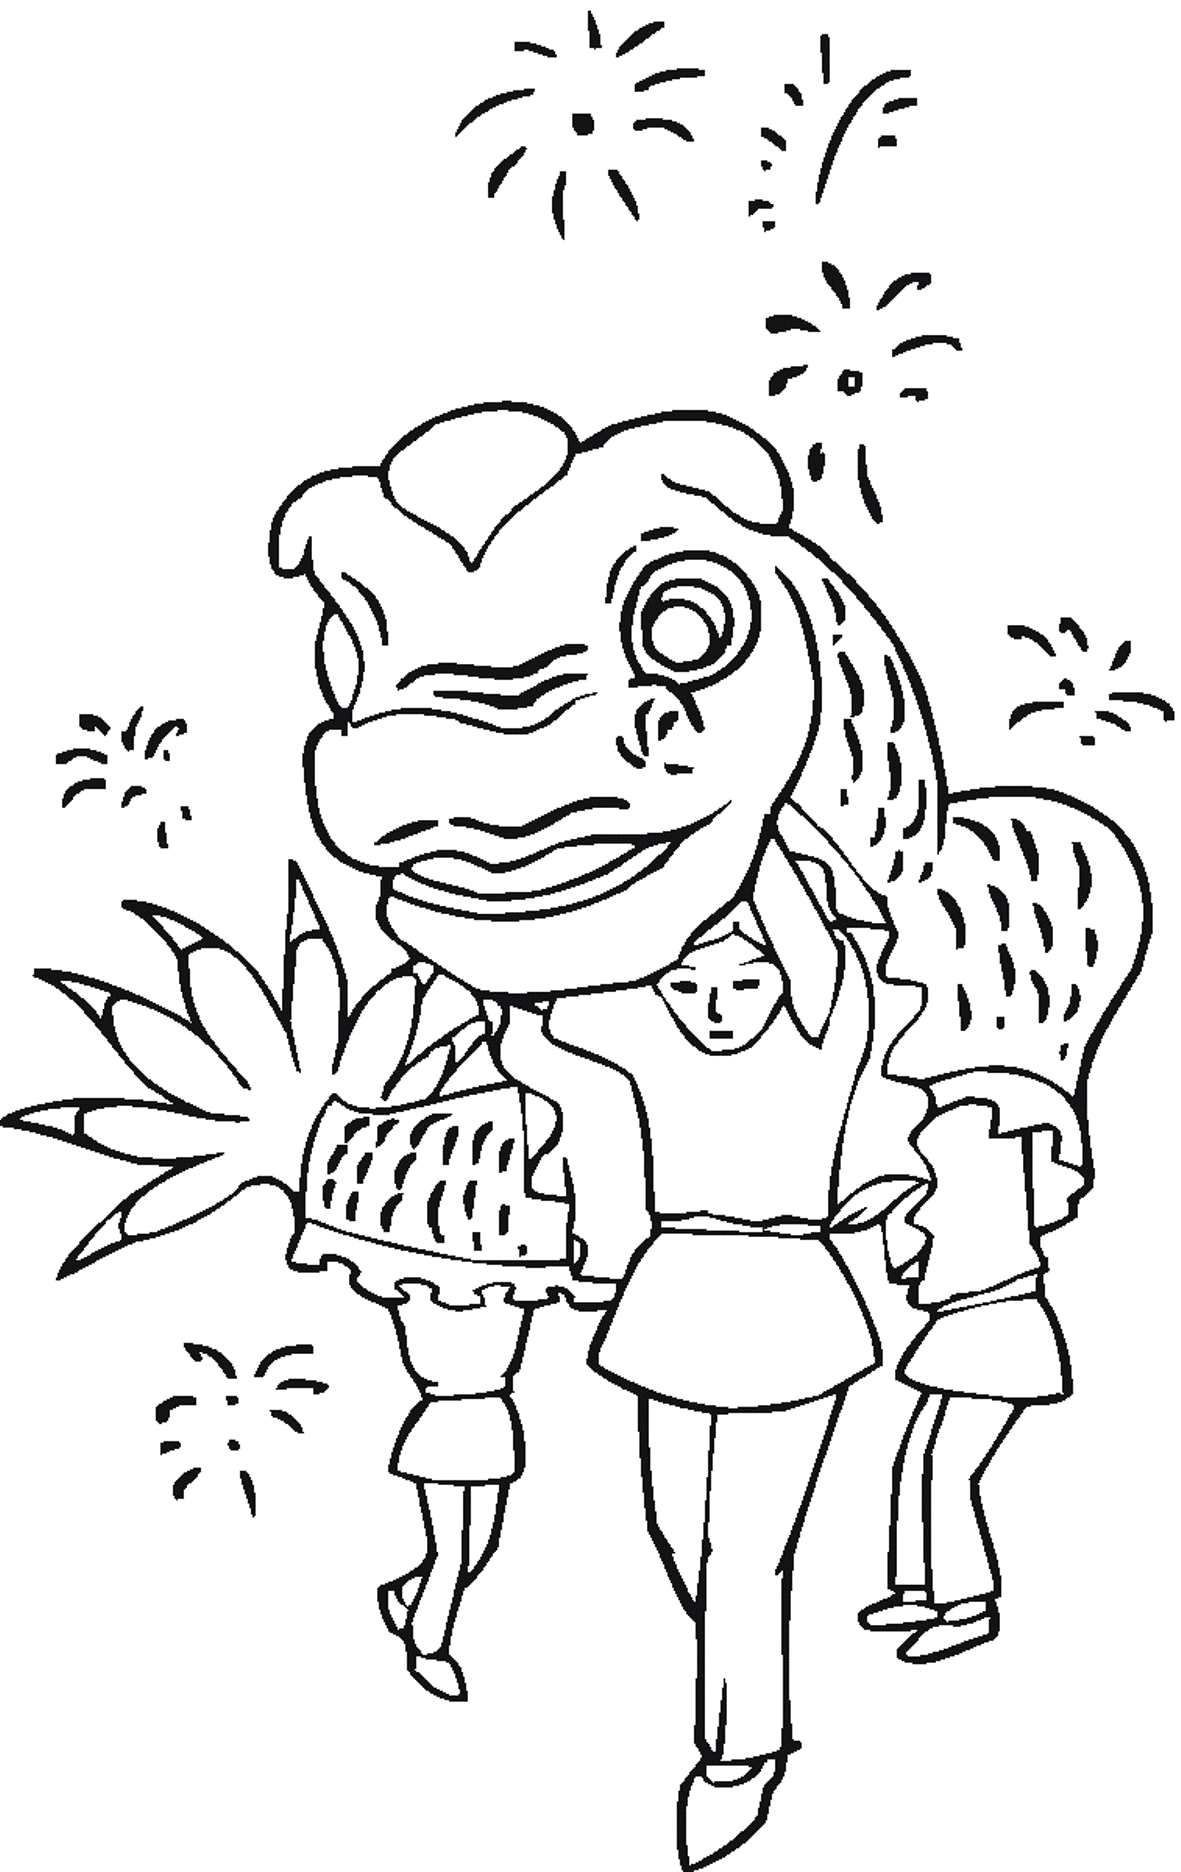 Chinese New Year S Celebrating018d Coloring Page